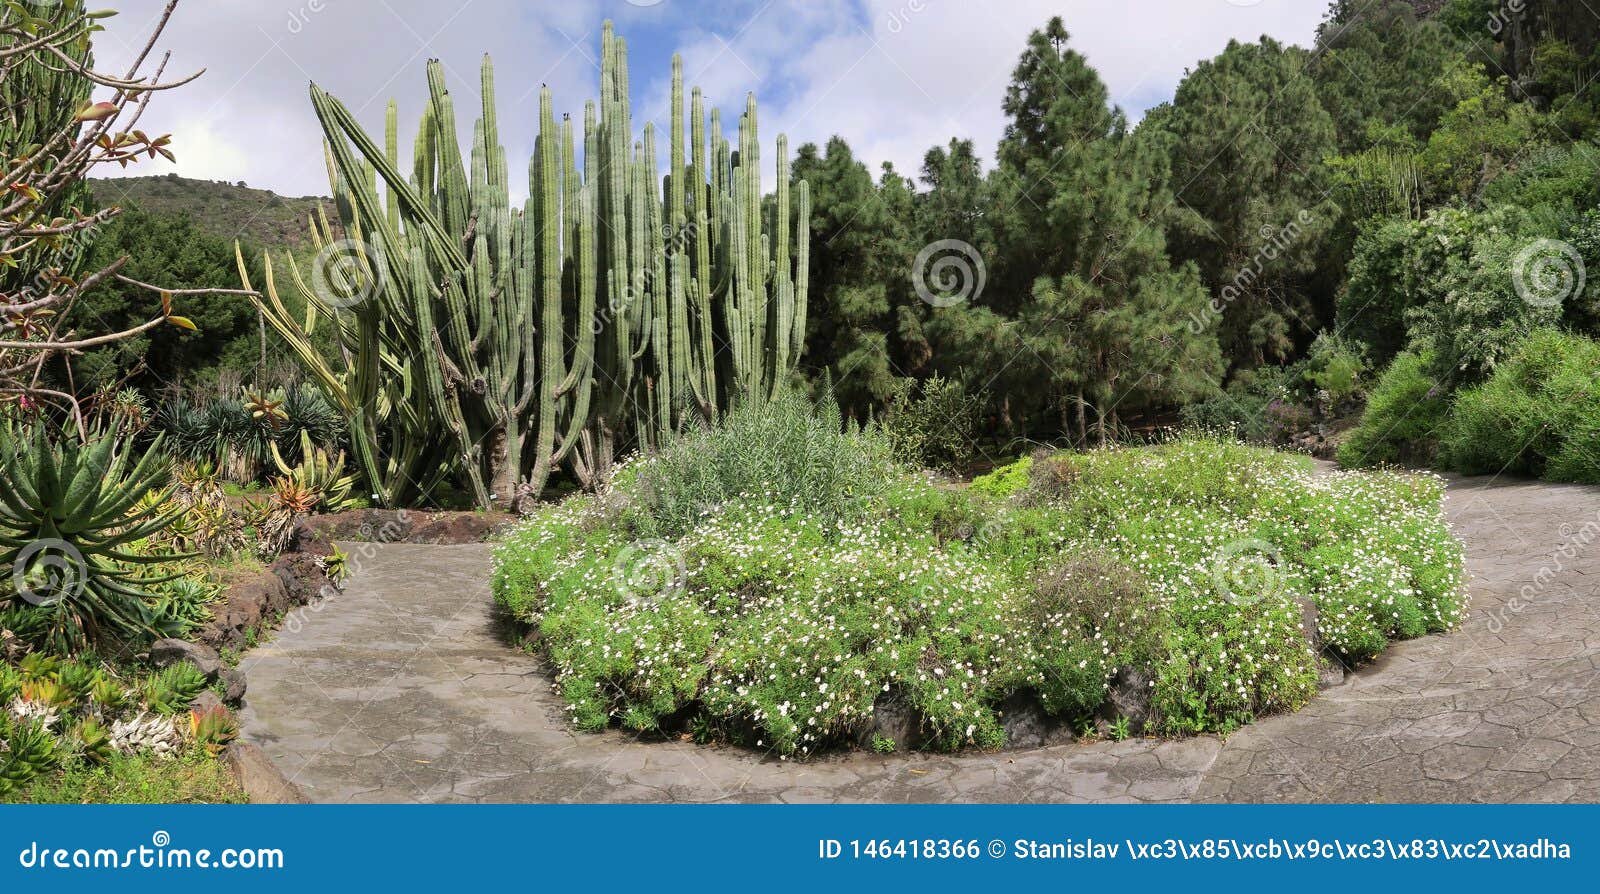 cactuses and trees in the botanical garden of jardÃÂ­n botÃÂ¡nico viera y clavijo in island of gran canaria